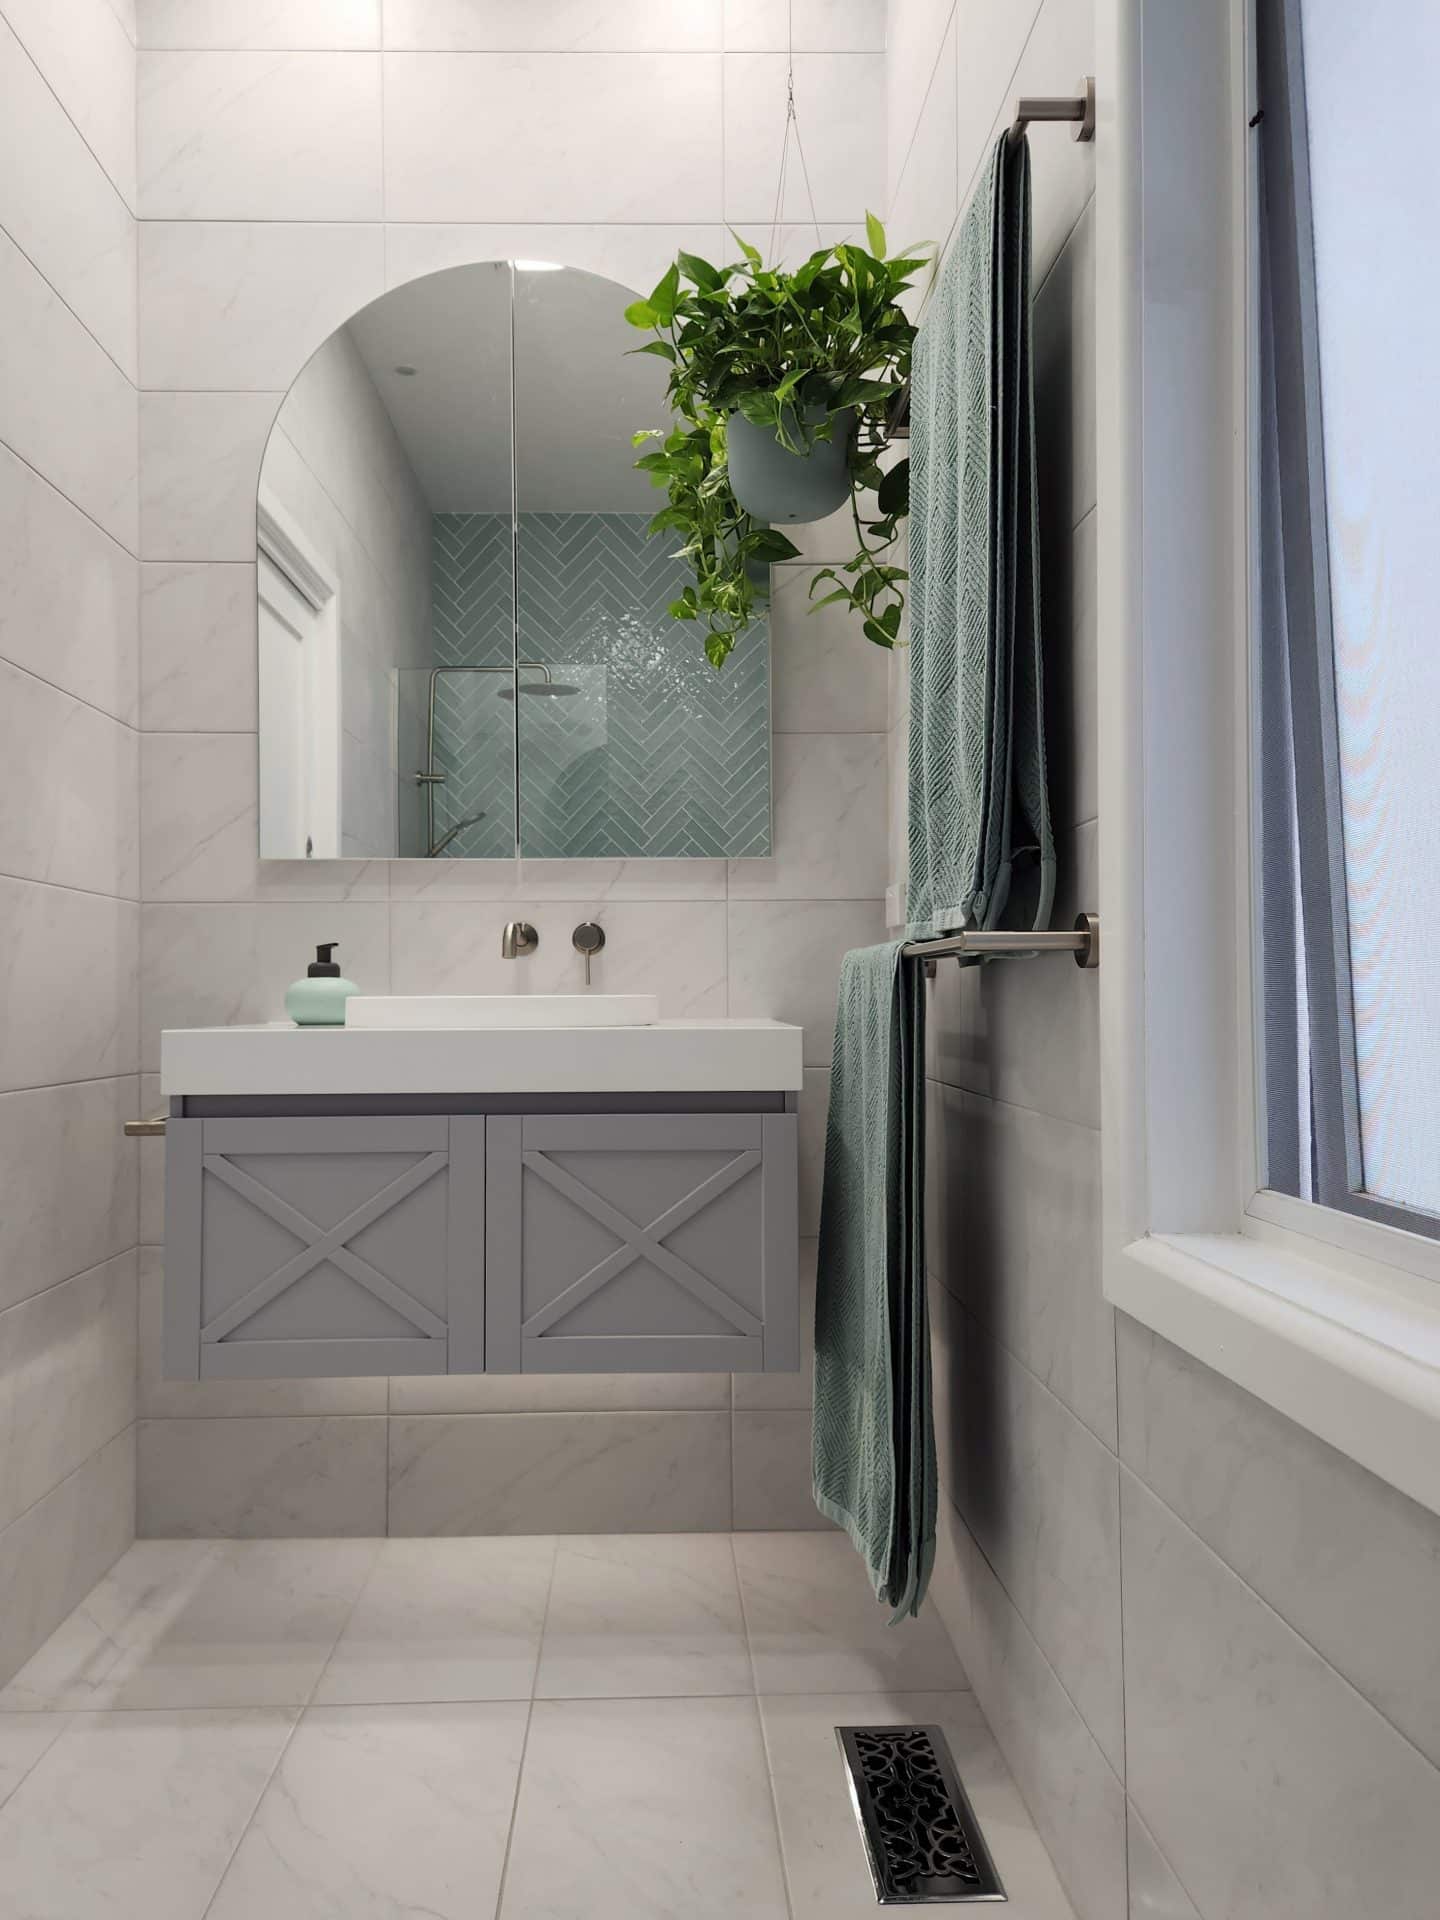 a modern bathroom with grey tiles and a plant on the wall.